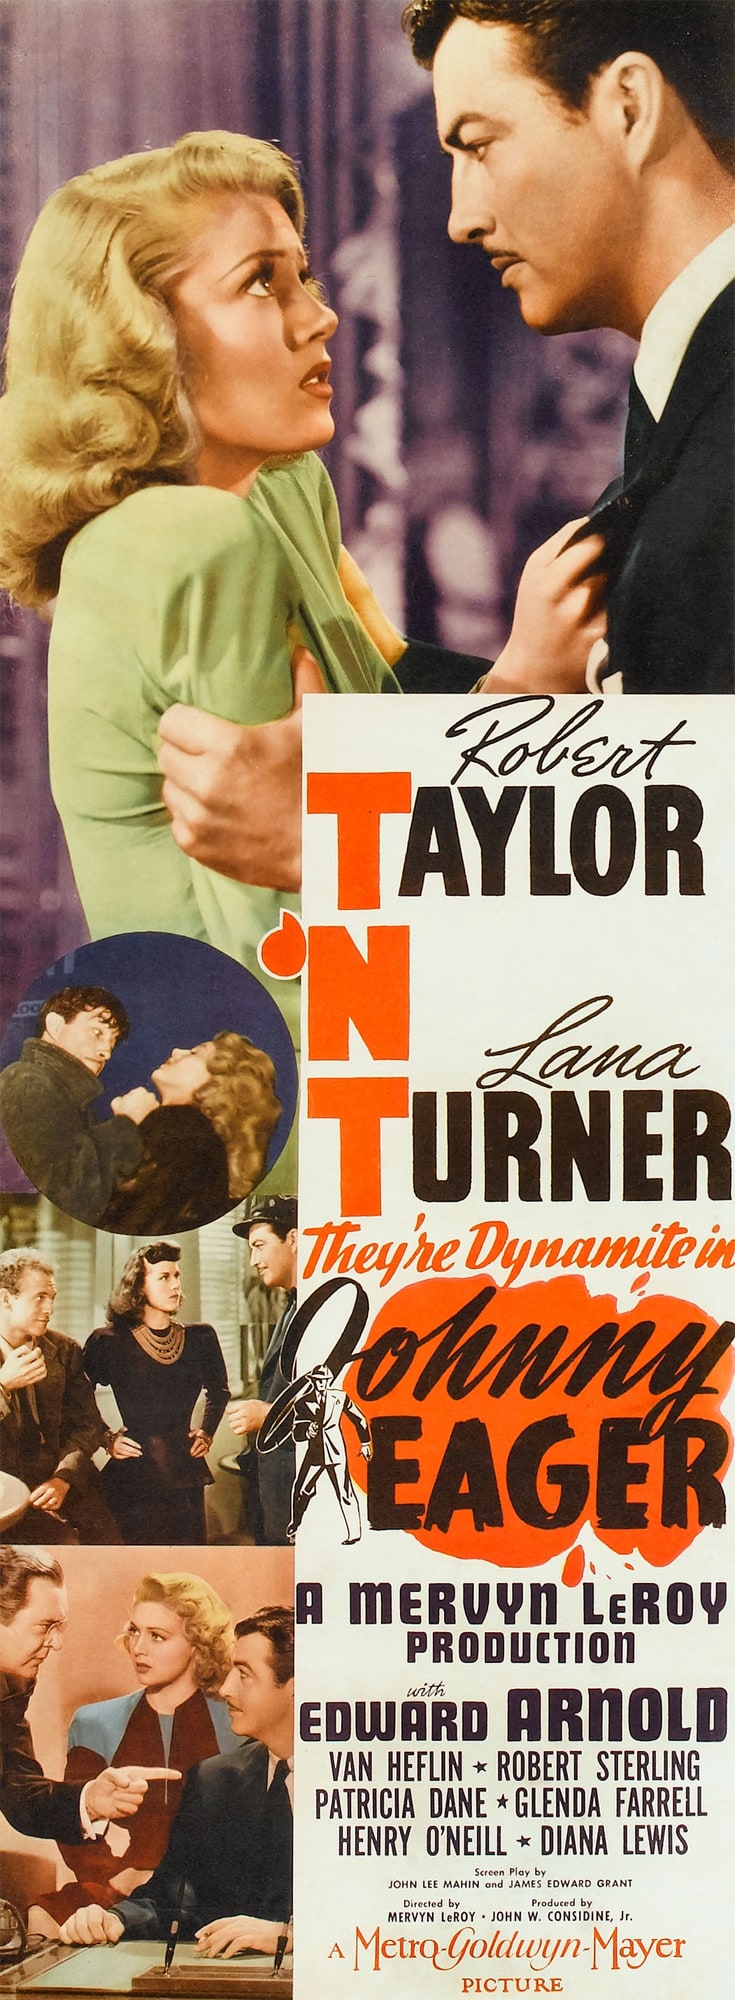 Johnny Eager                                  (1941)